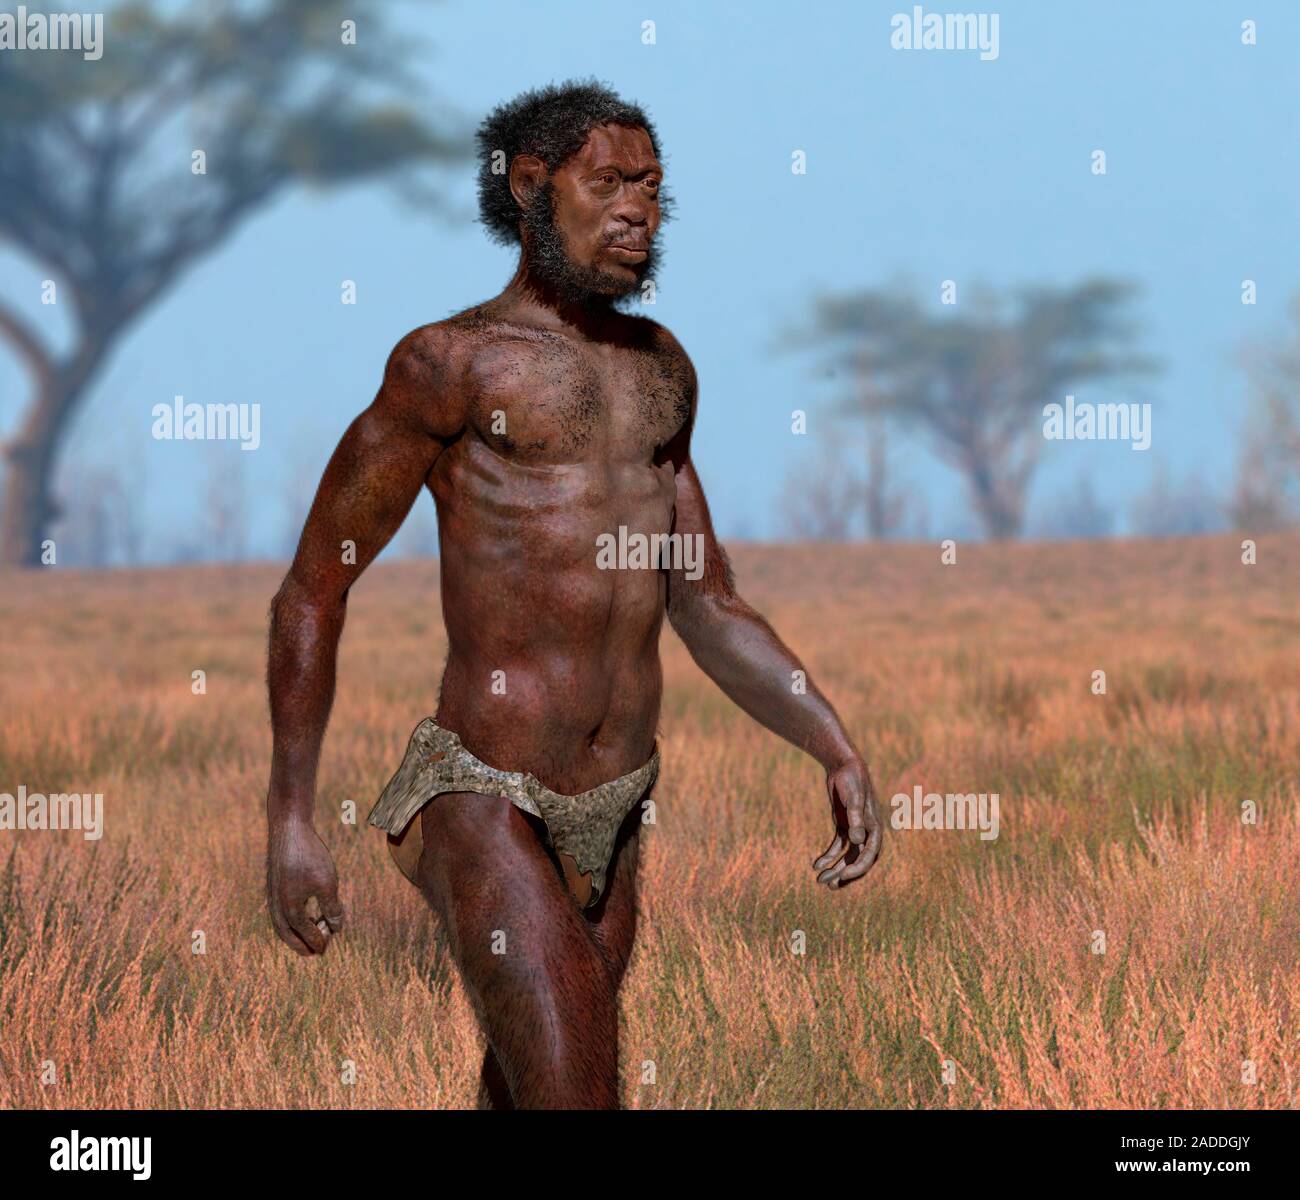 Illustration of a Homo sapiens idaltu male. This extinct subspecies of Homo sapiens (modern humans) lived in Ethiopia around 160,000 years ago. It is Stock Photo